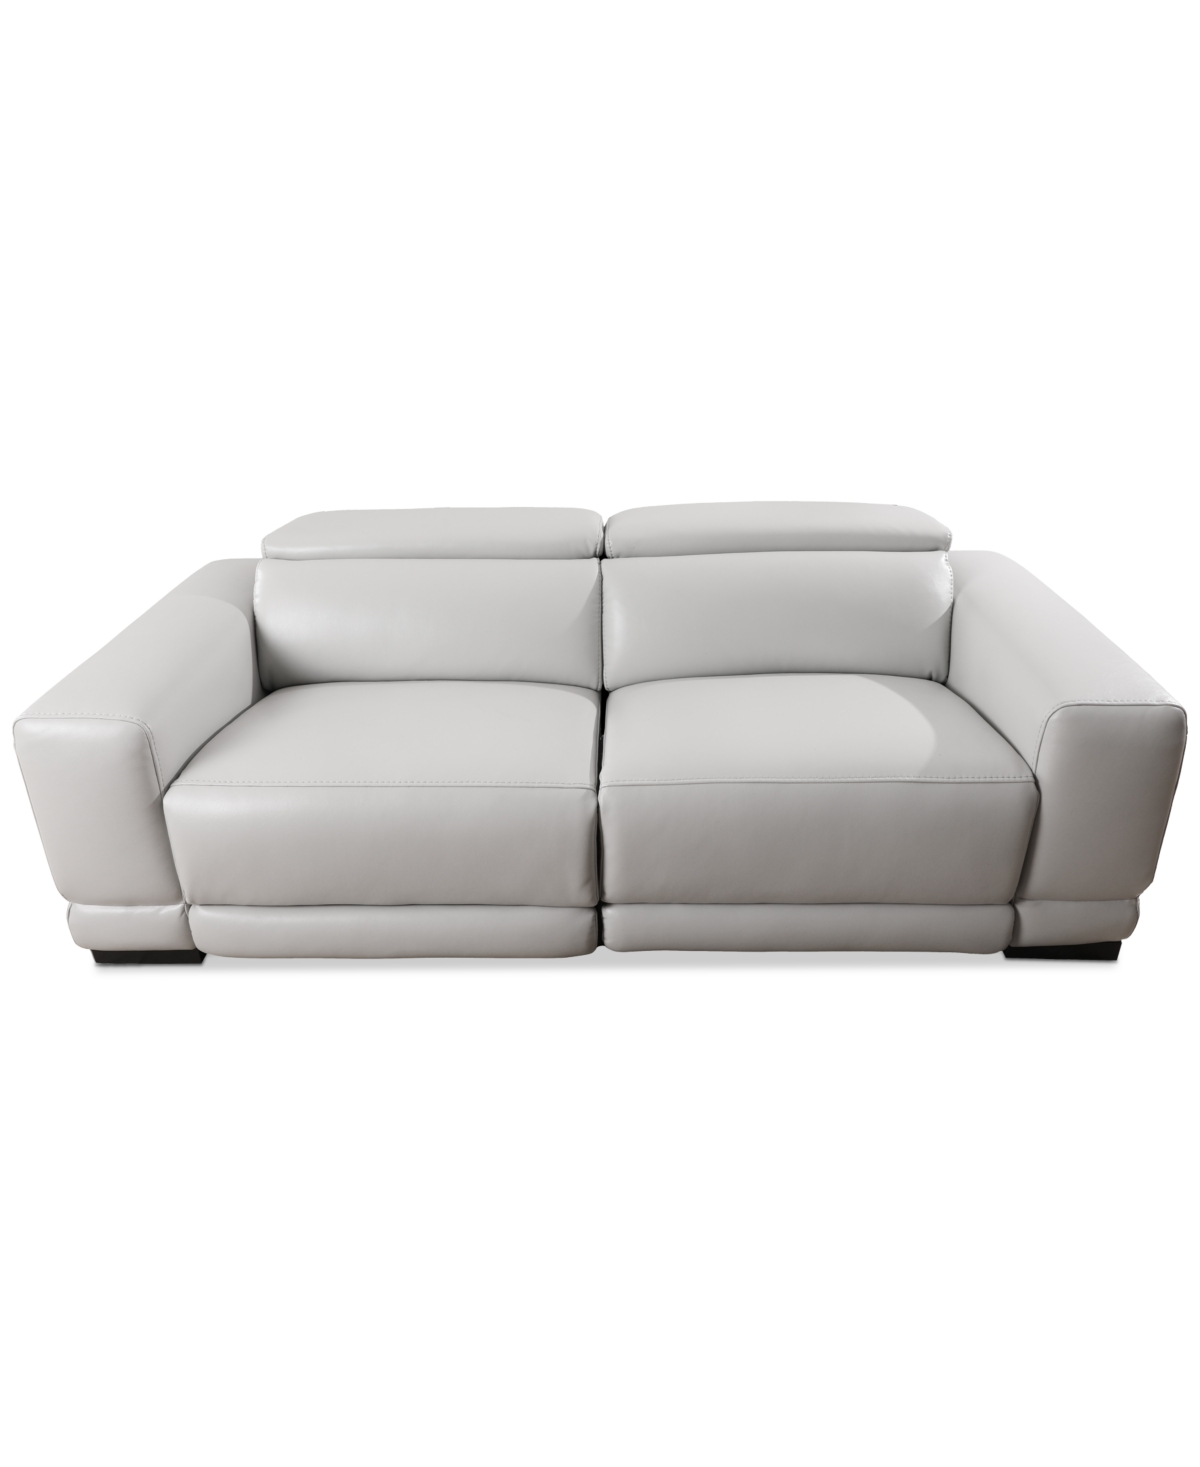 Furniture Krofton 2-pc. Beyond Leather Fabric Sofa With 2 Power Motion Recliners, Created For Macy's In Fog